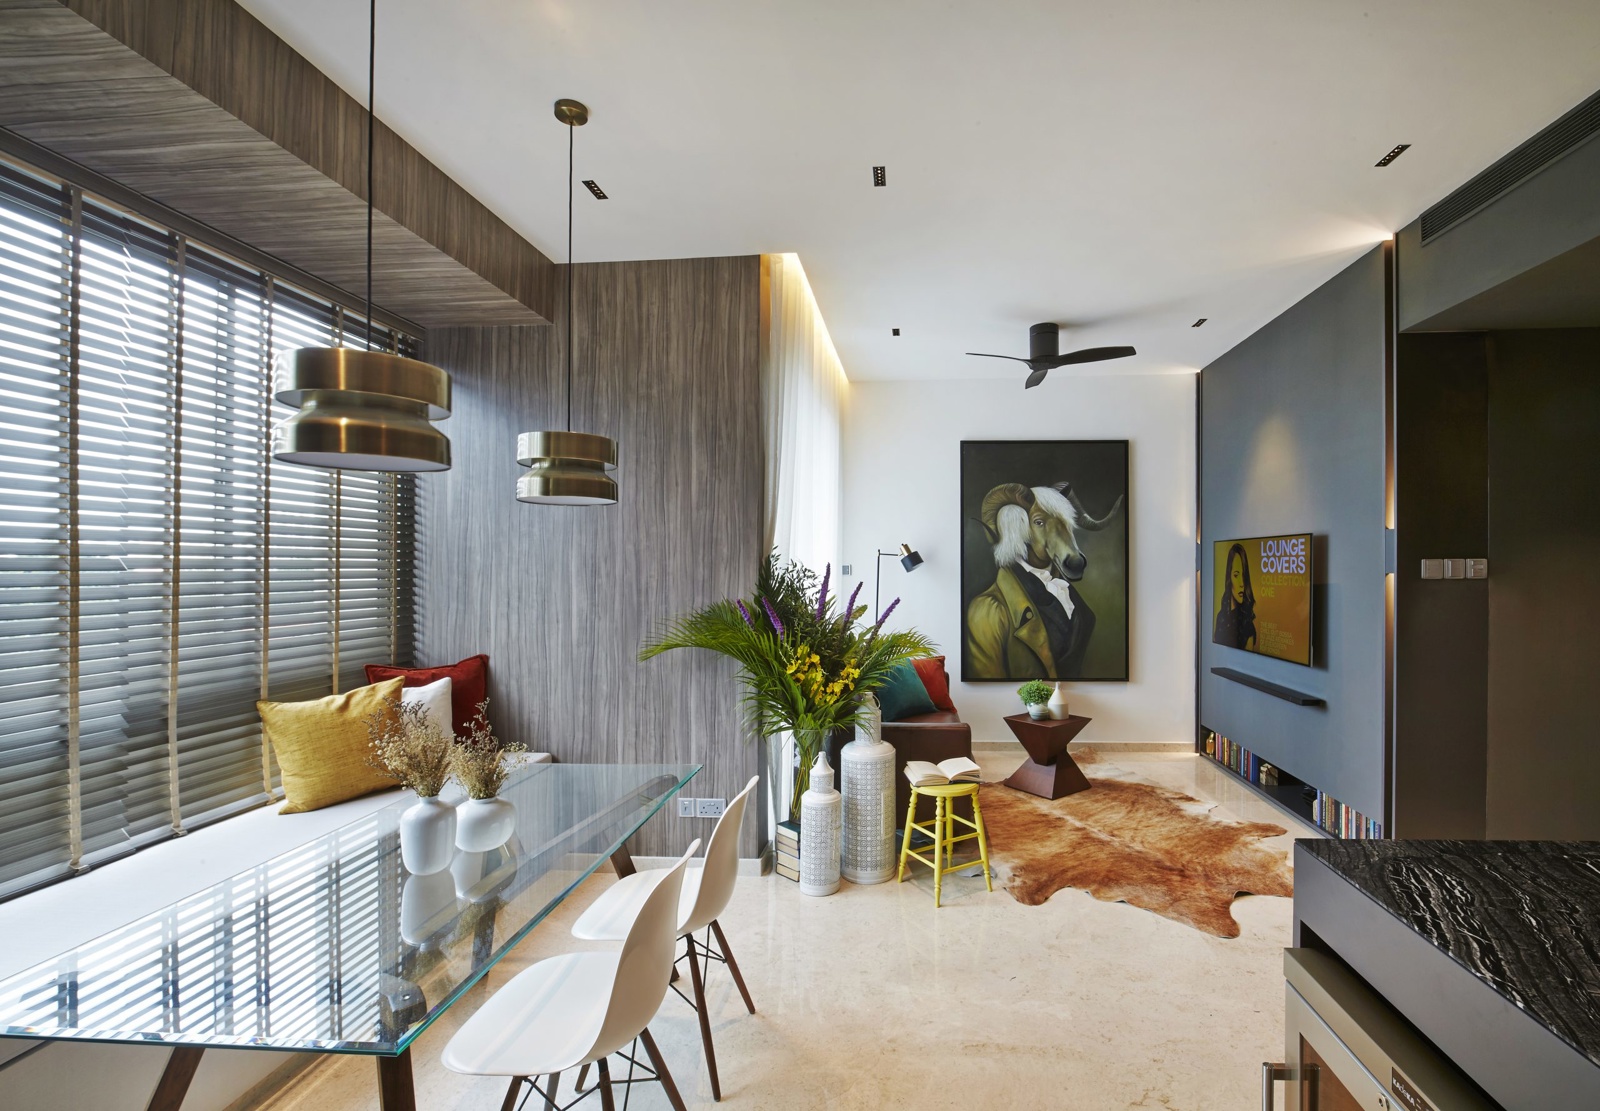 One Tree Hill Residence - 1001sqft by Honeycomb Design Studio. Unit is HDB and follows a  style.